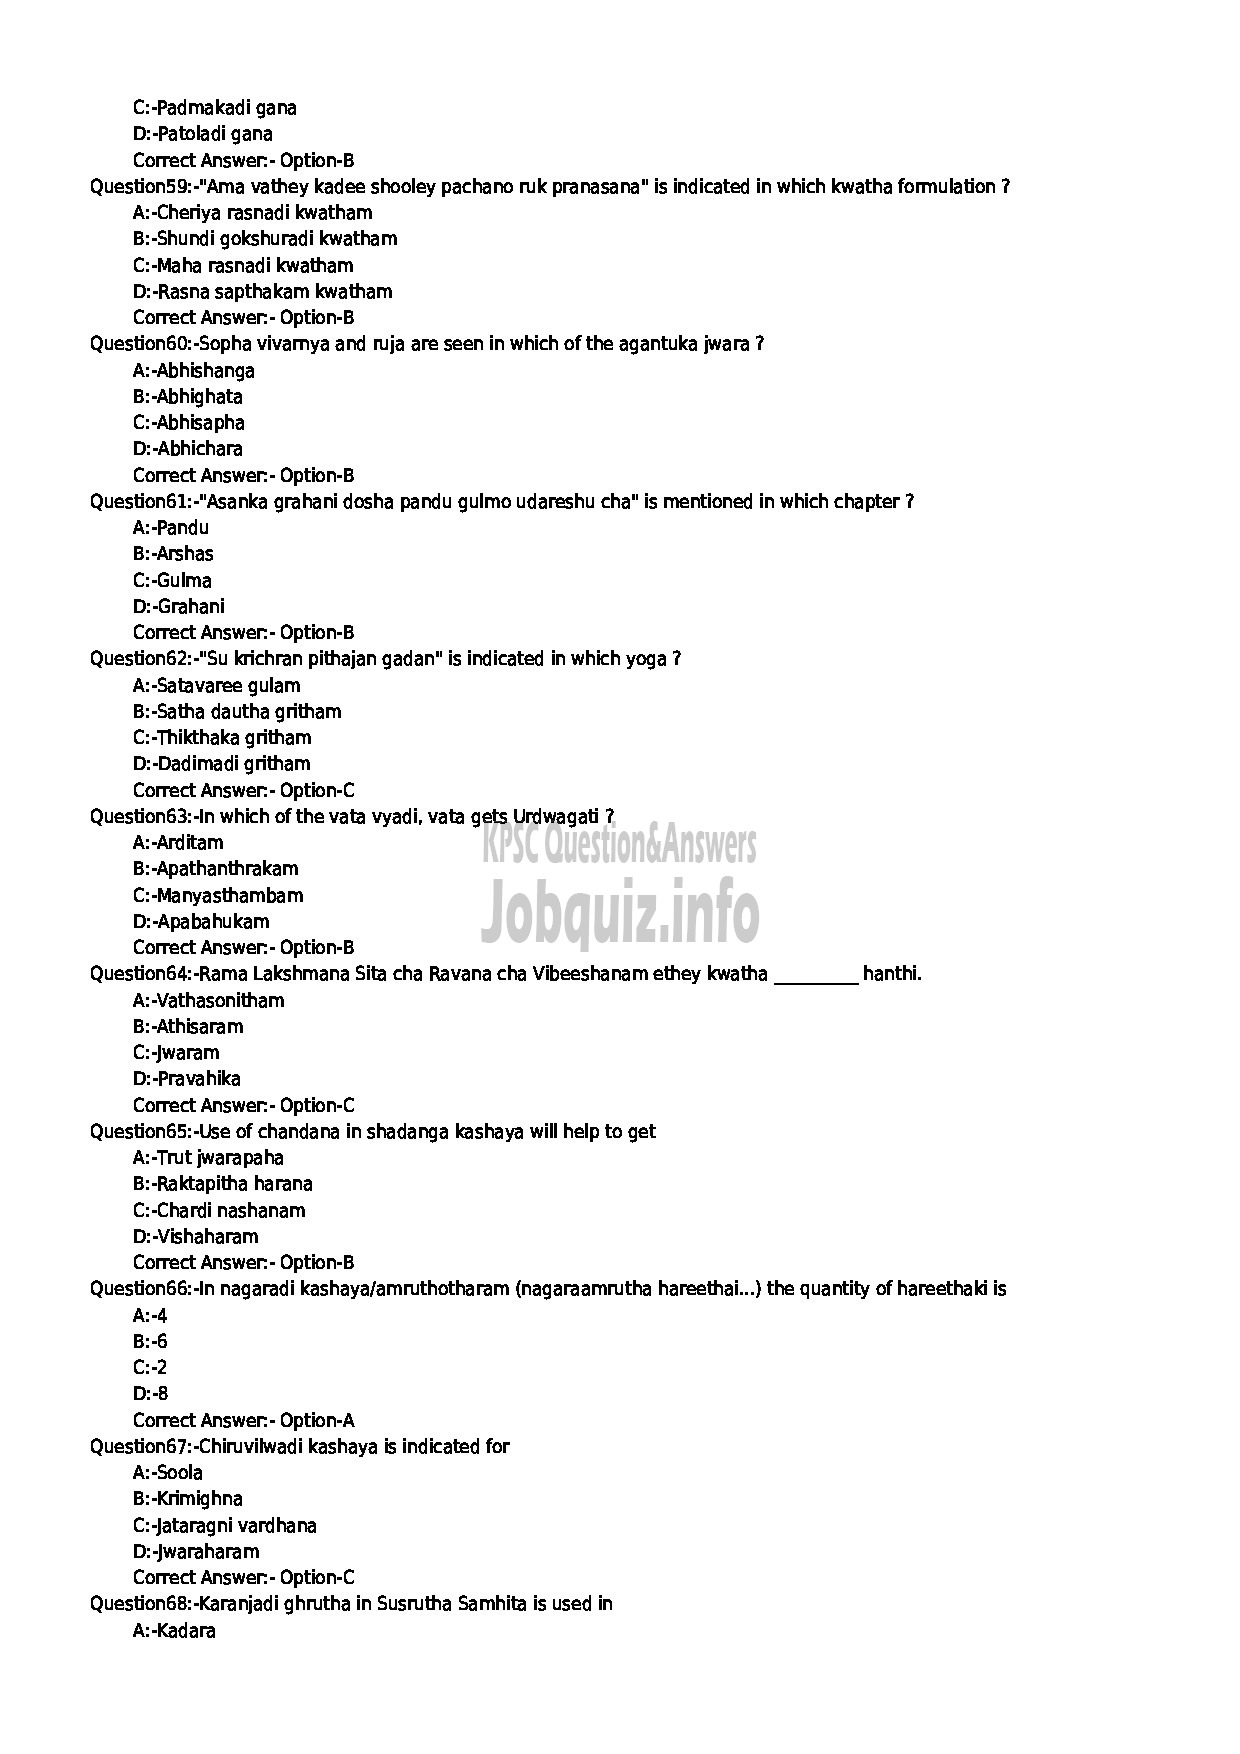 Kerala PSC Question Paper - ASSISTANT INSURANCE MEDICAL OFFICER AYURVEDA-7